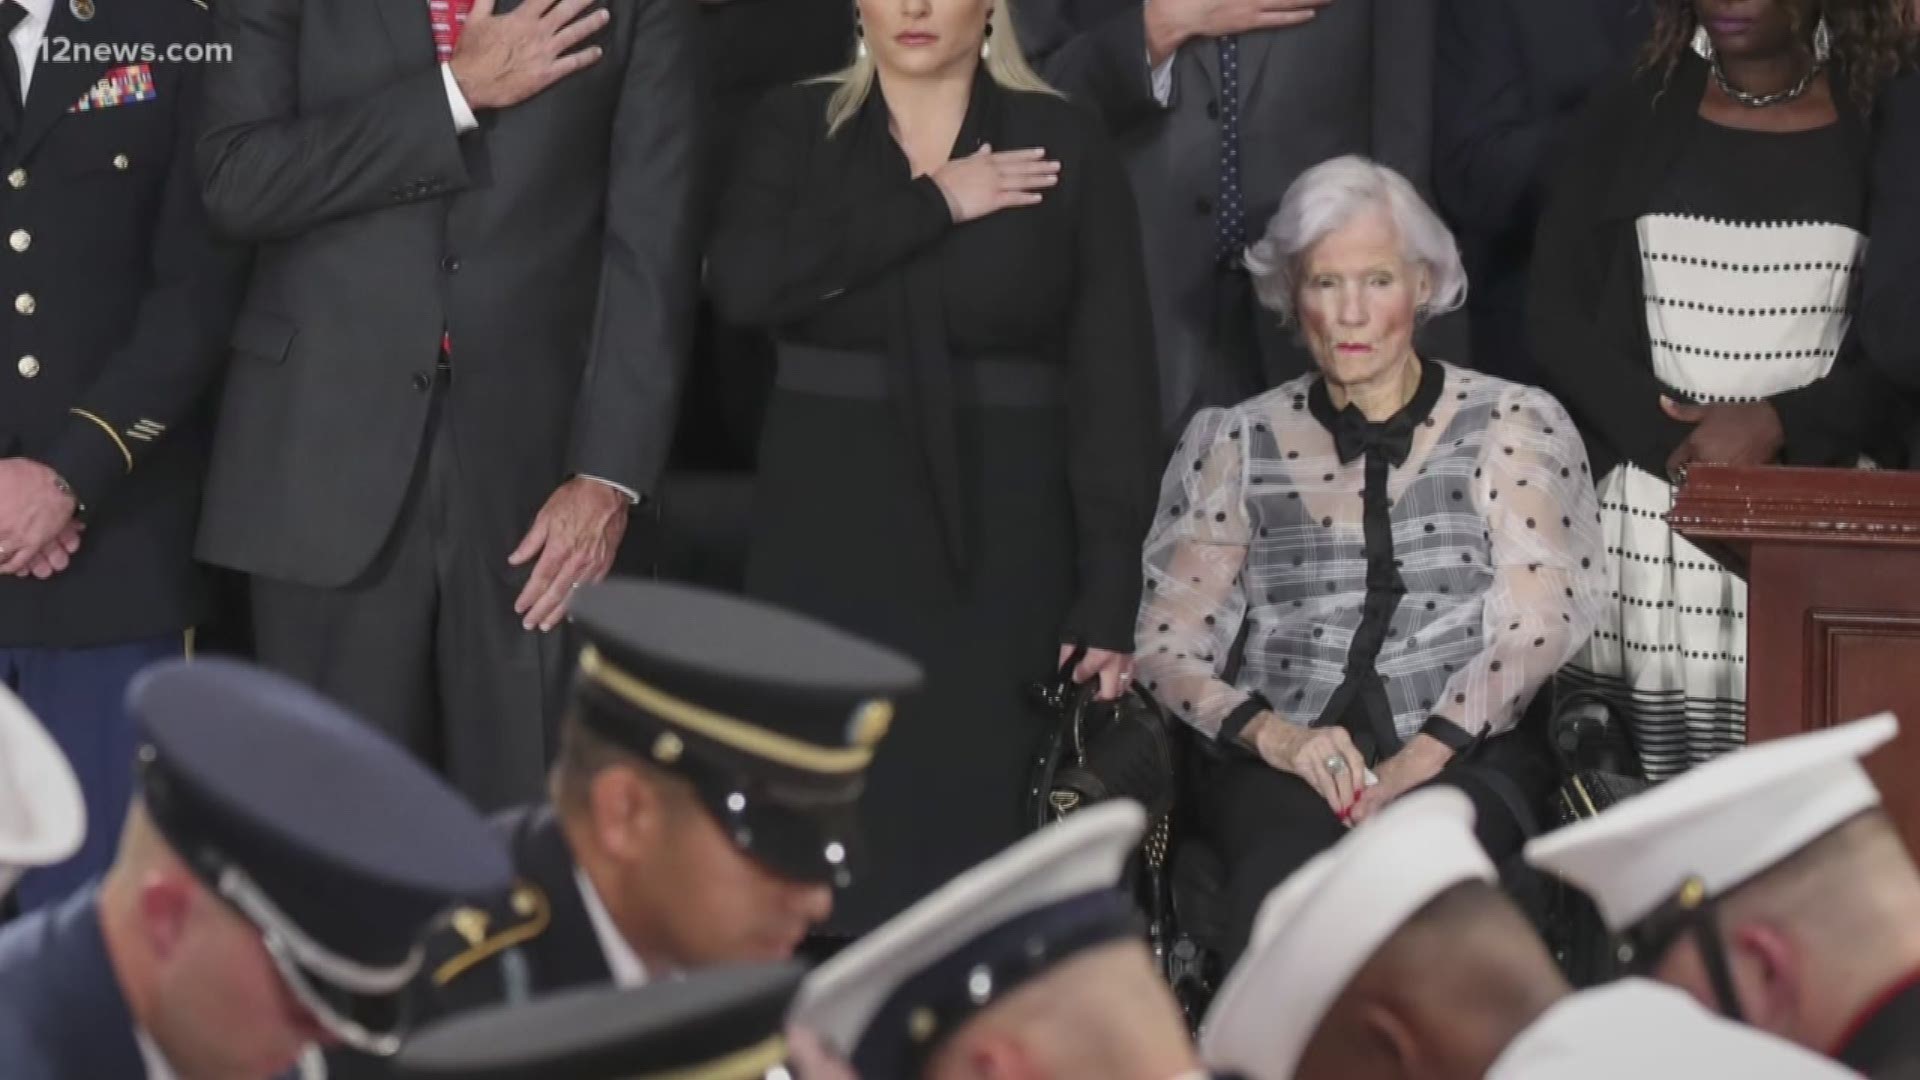 Senator McCain is survived by his 106-year-old mother, Roberta McCain. Roberta now has to do something that every parent dreads: bury her son.